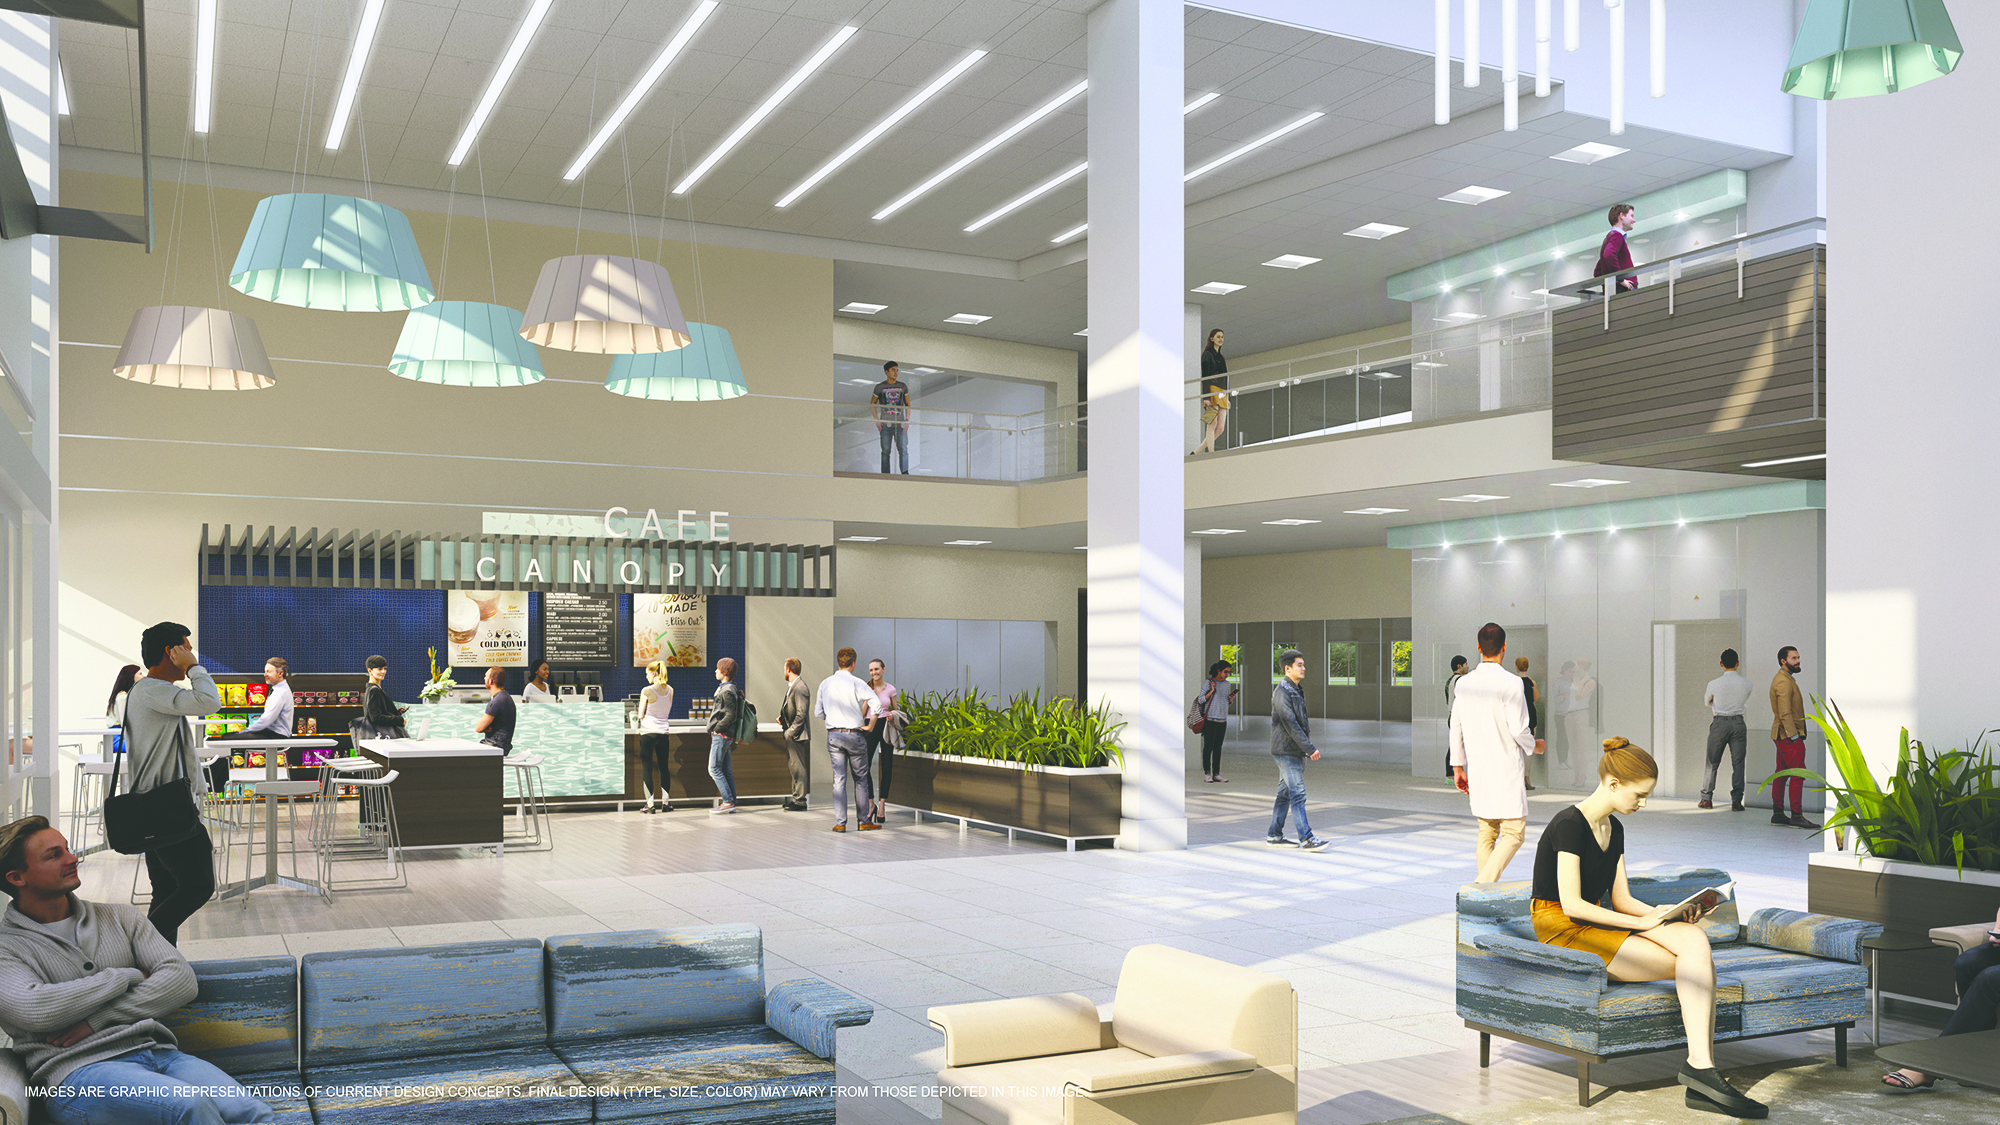 Baptist HealthPlace will include a cafe with healthy food options.